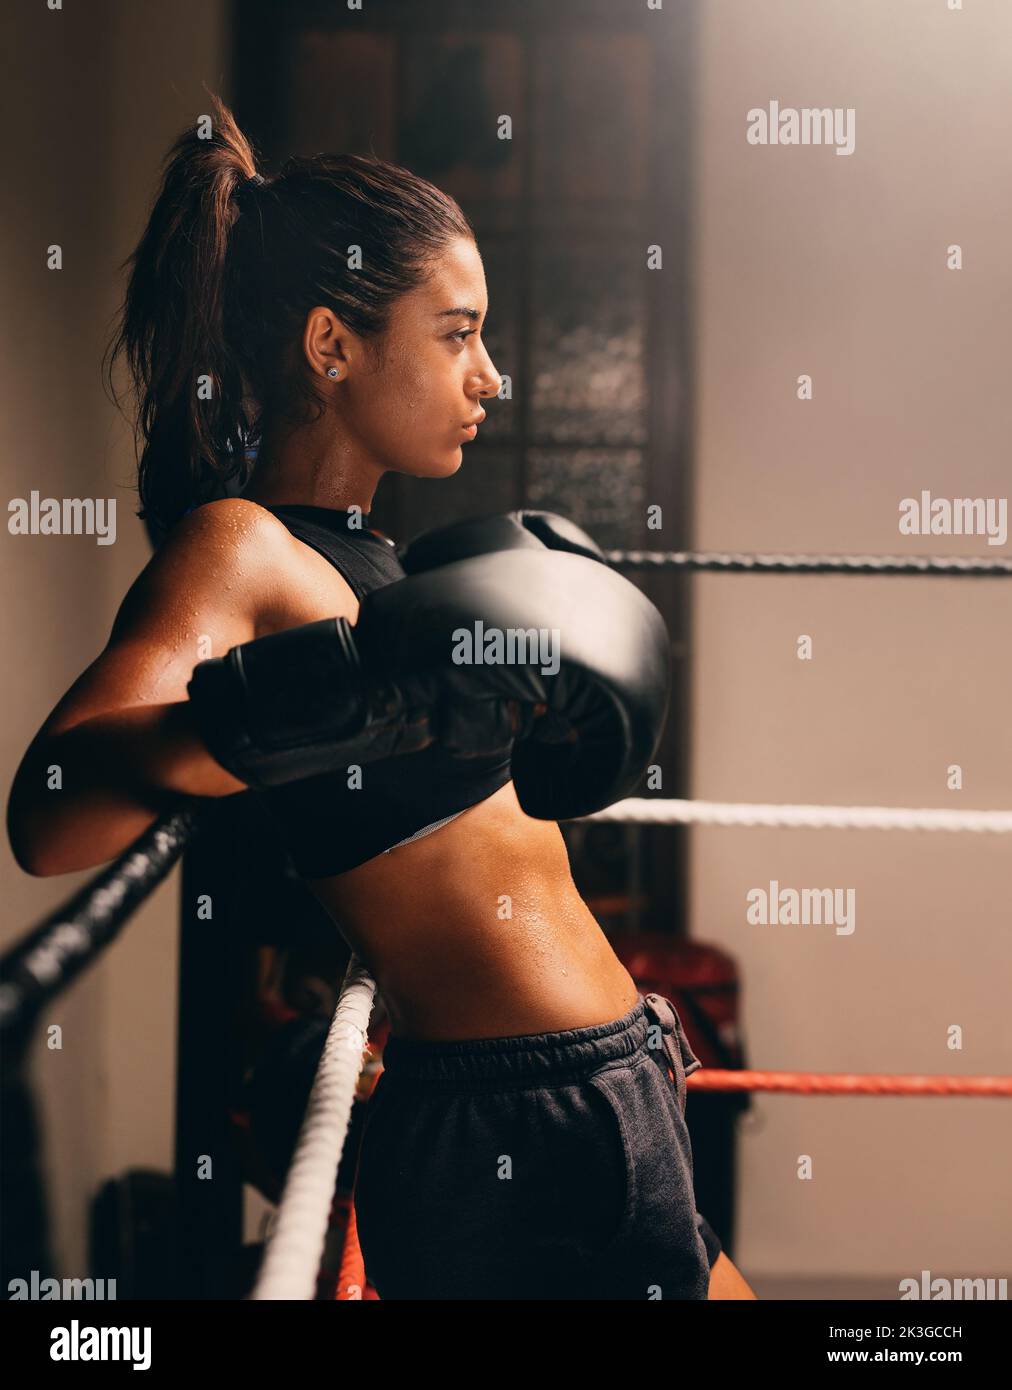 Muscular female boxer leaning against the ropes in a boxing ring. Confident female athlete getting ready for a boxing match. Stock Photo